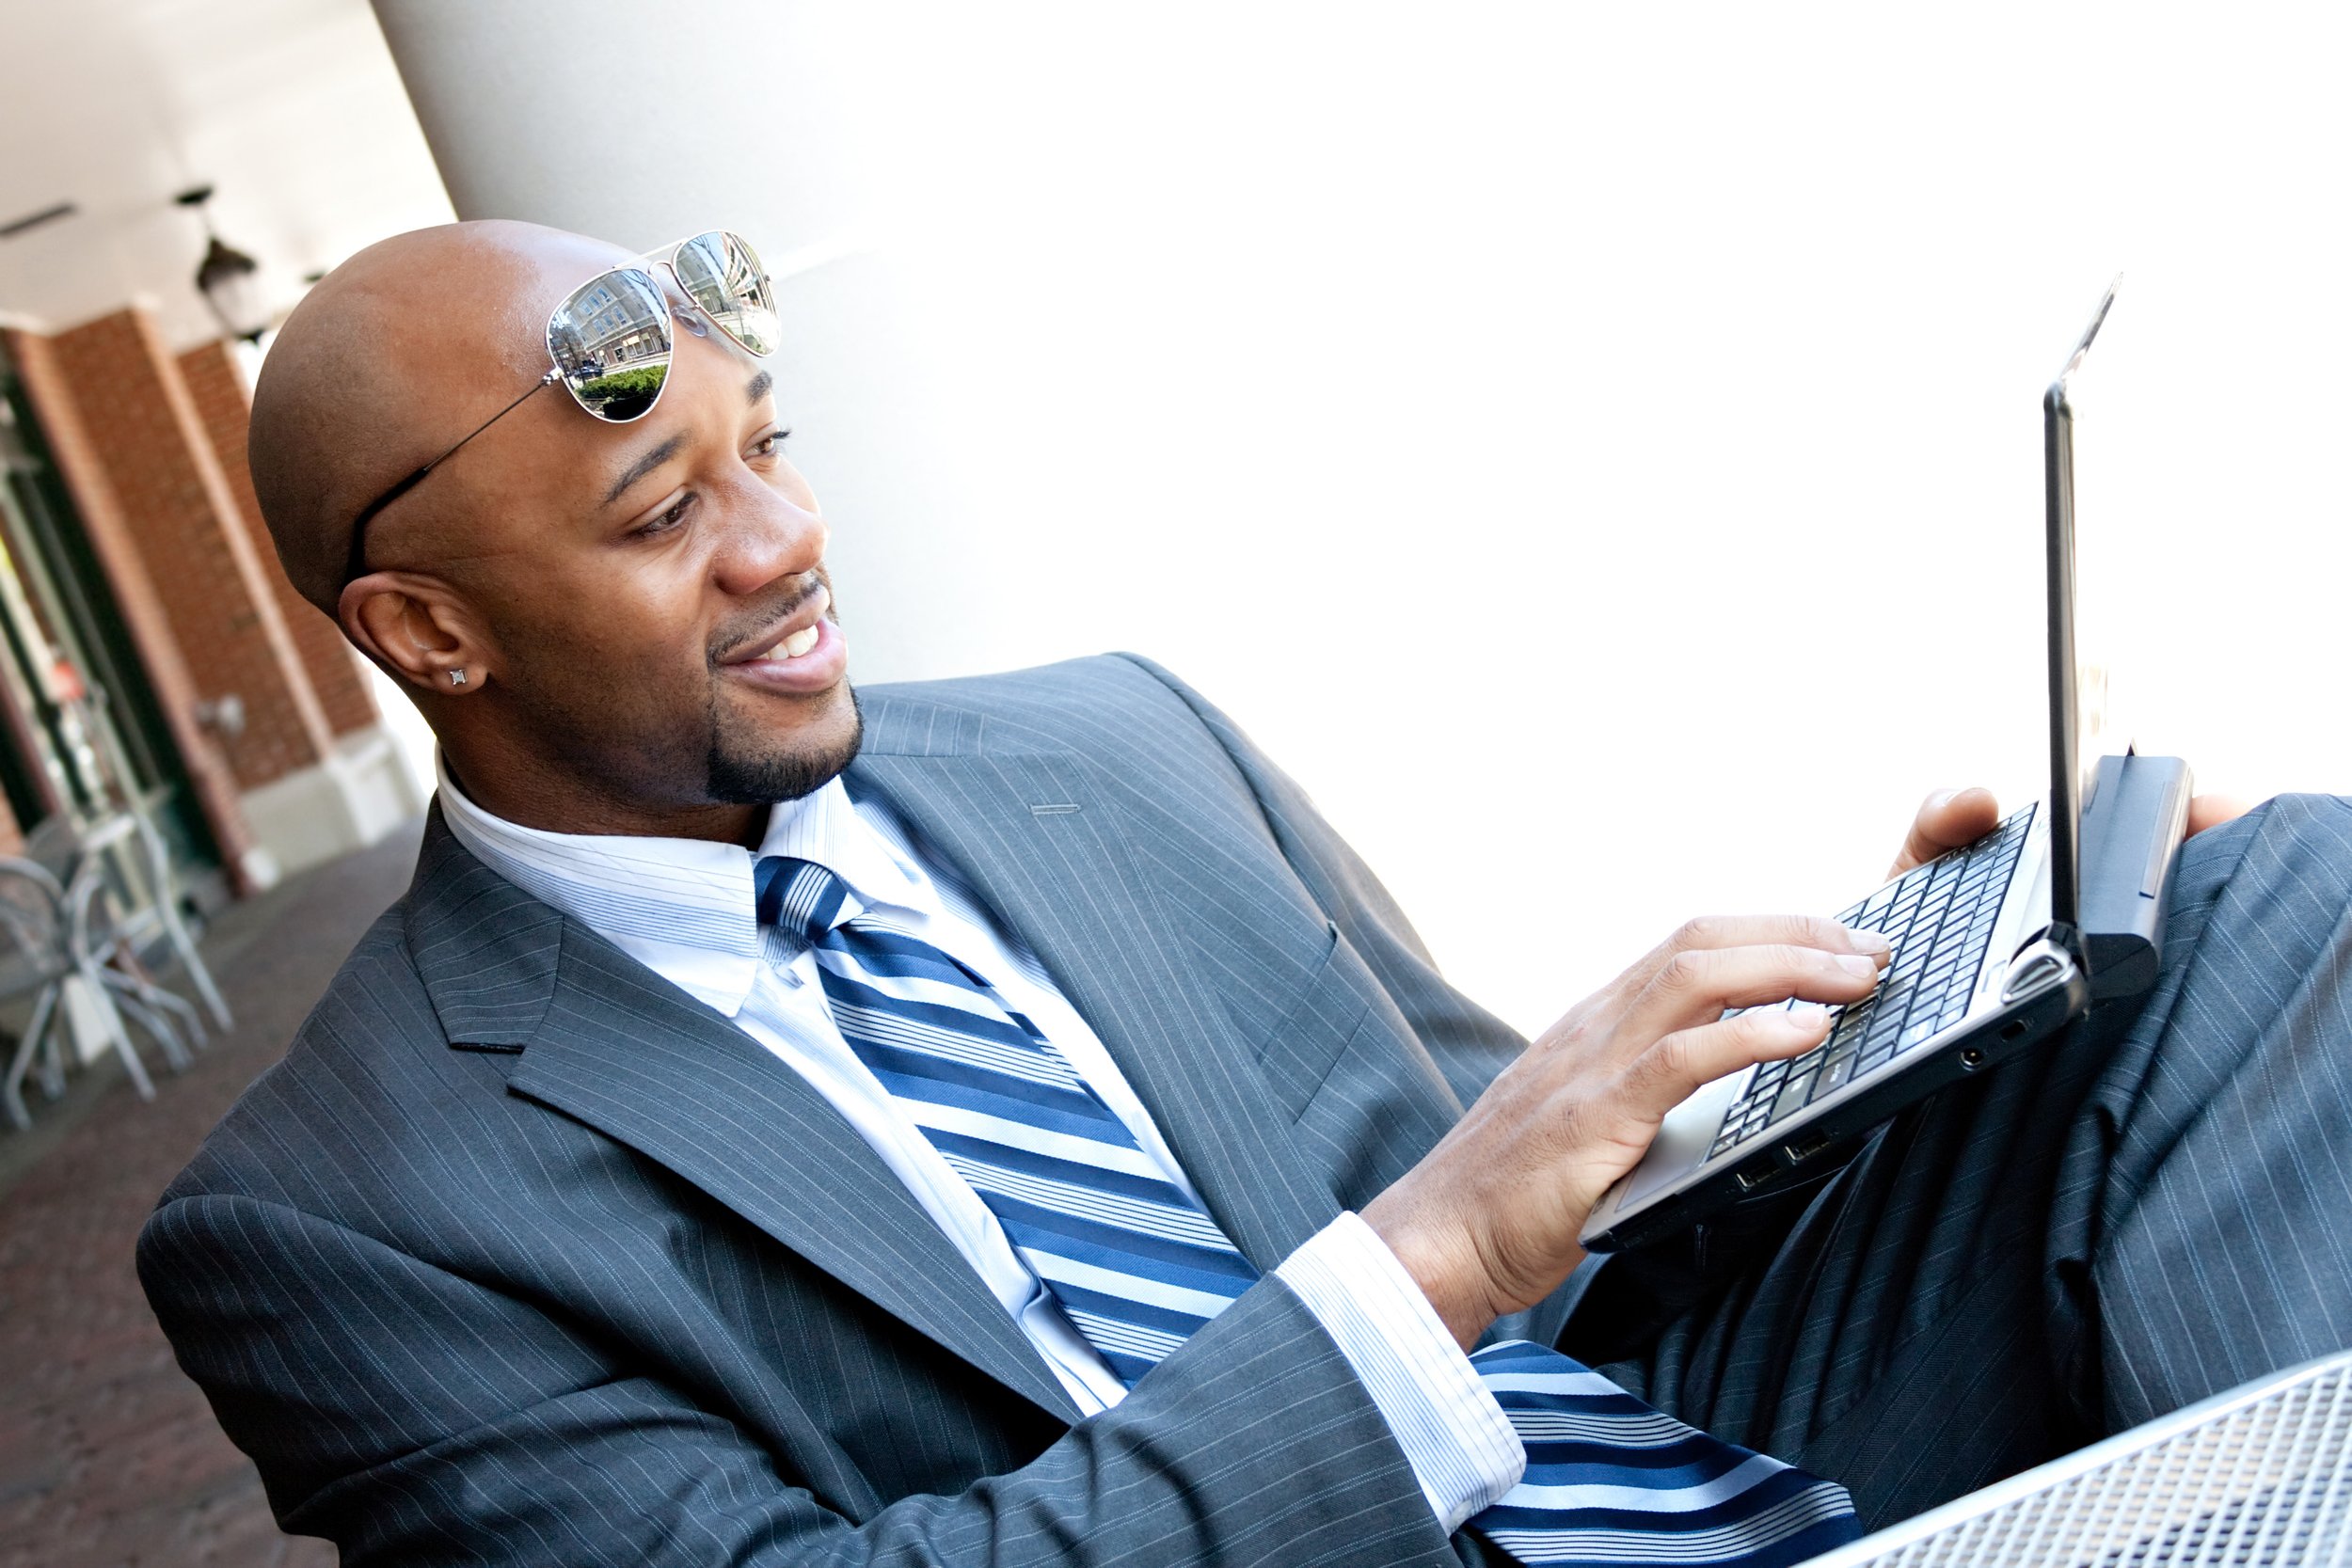 an-african-american-business-man-in-his-early-30s-using-his-laptop-or-netbook-computer-outdoors-with-copy-space-for-your-text_BKu-2w0Sj.jpg